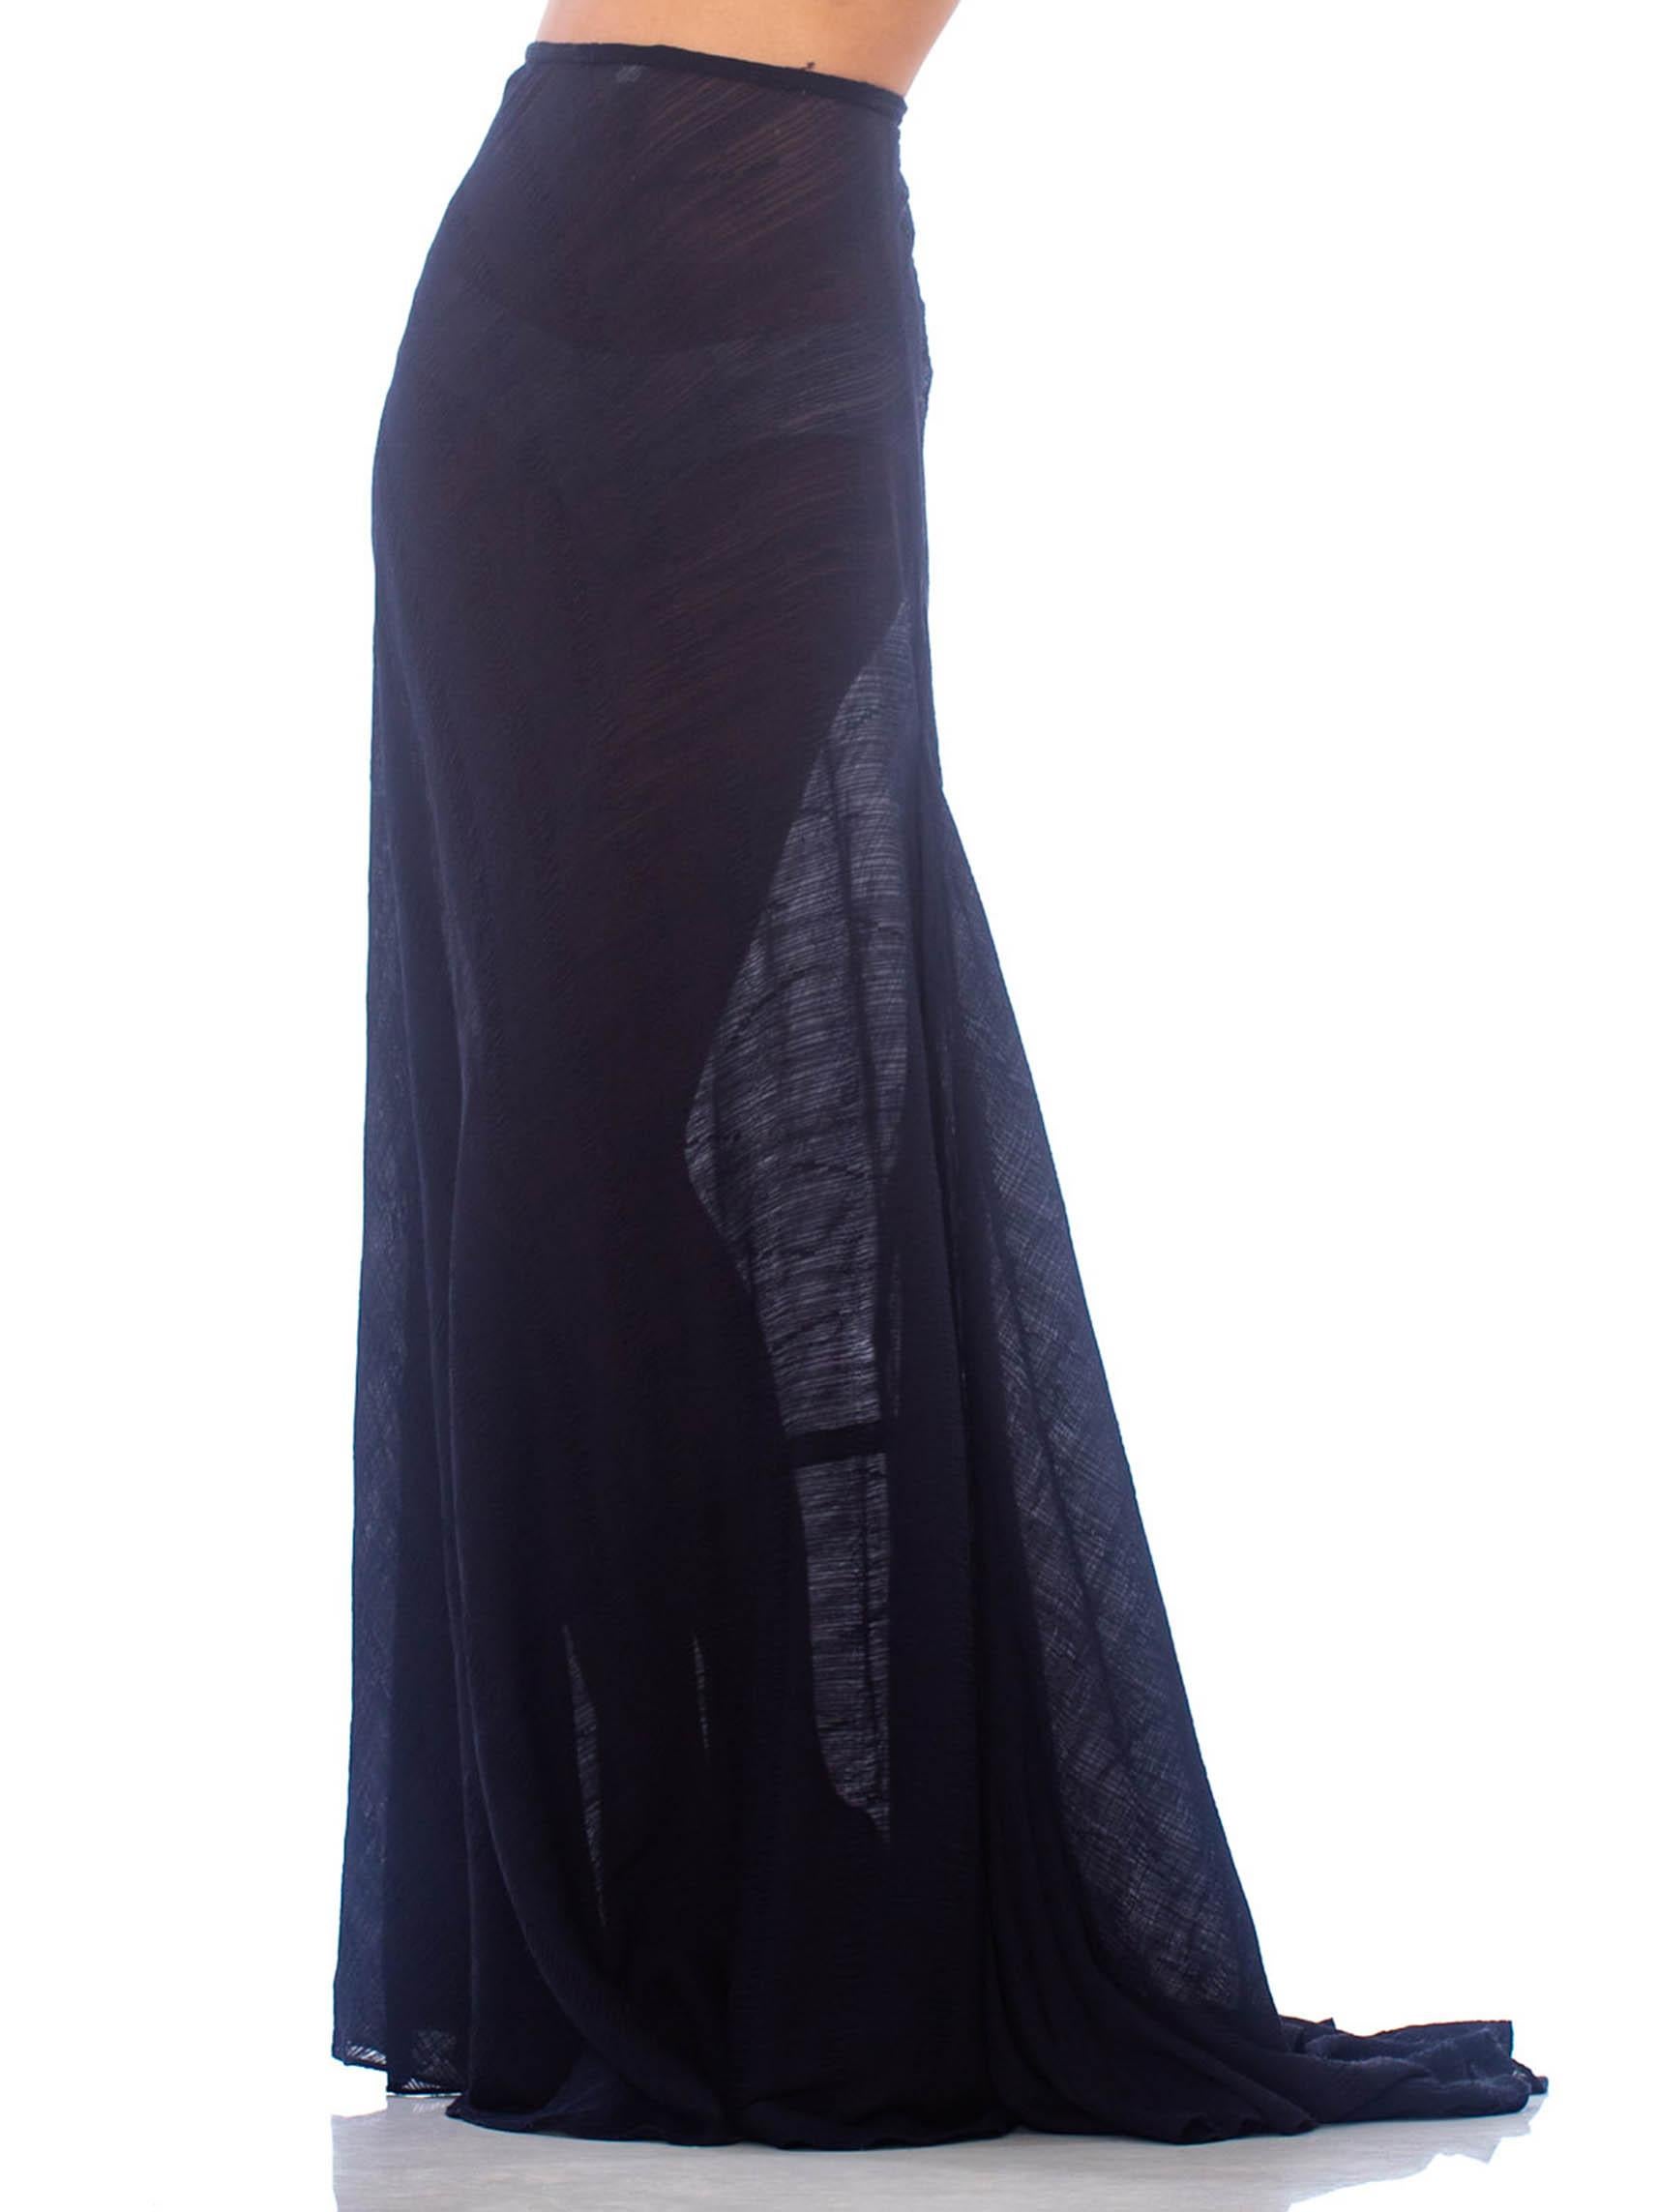 Runway sample from the early 2000s 2000S CALVIN KLEIN Navy Blue Sheer Silk Textured Chiffon Bias & Trained Skirt 